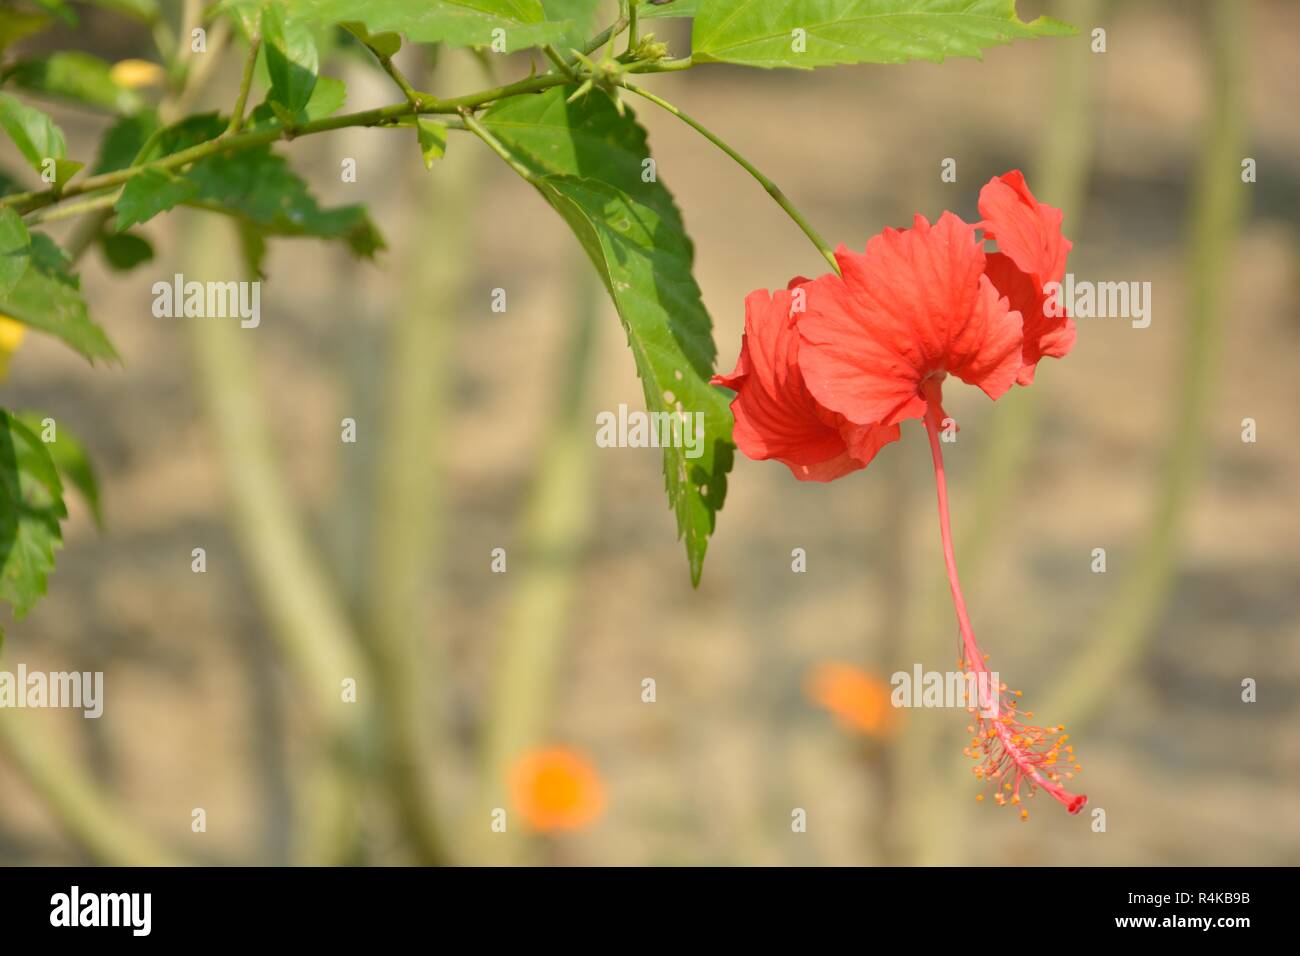 A single China Rose ( Hibiscus Rosasinensis ) also known as Chinese hibiscus and shoeblackplant in closeup hanging down in a garden with green leaves. Stock Photo